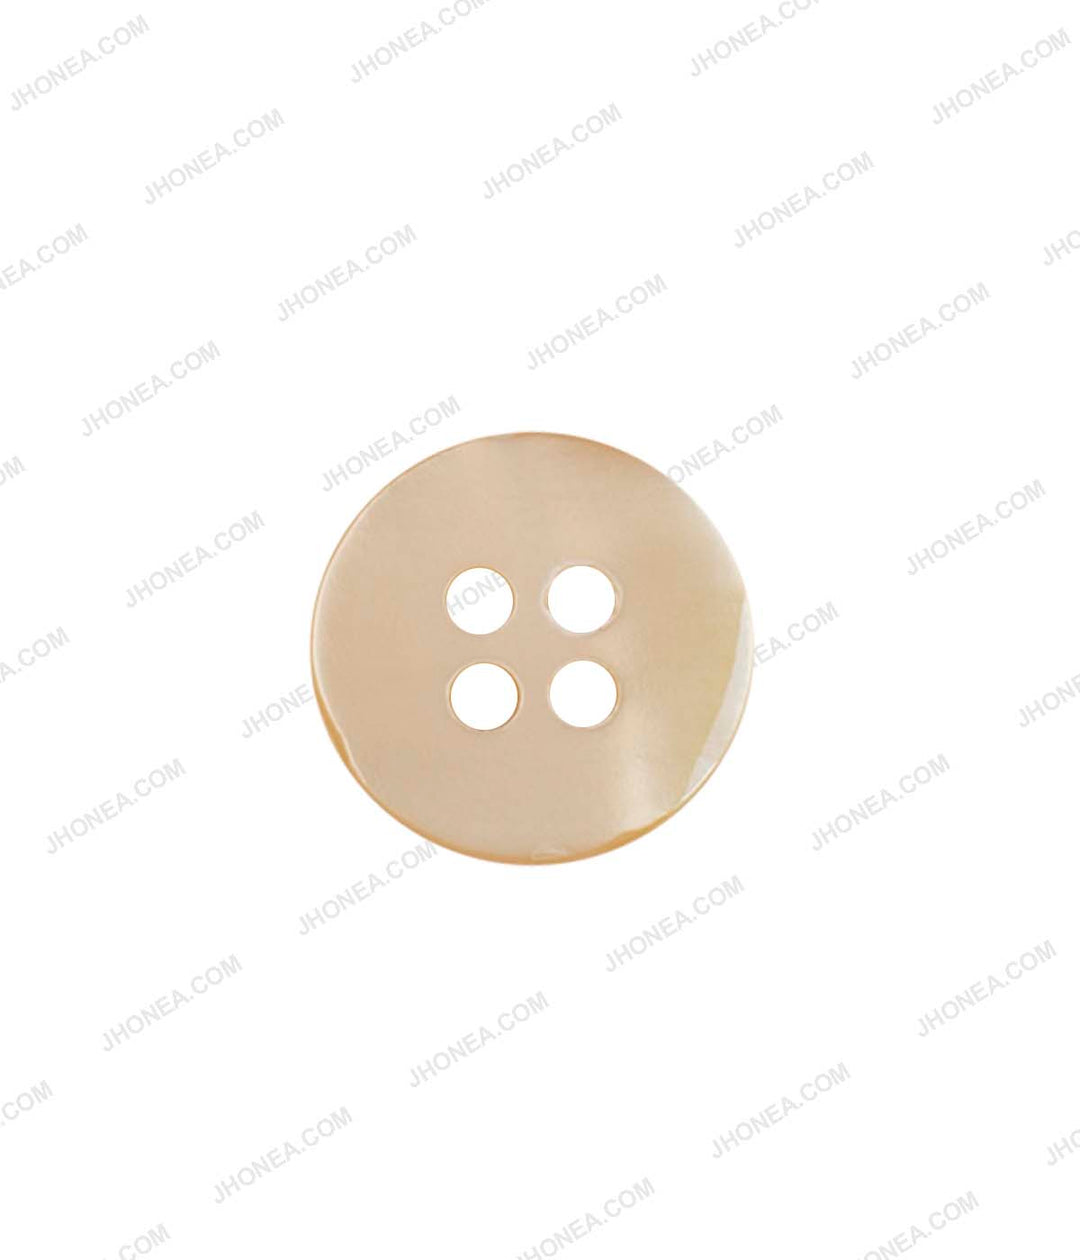 Glossy & Shiny Pearlescent White Shirt Buttons